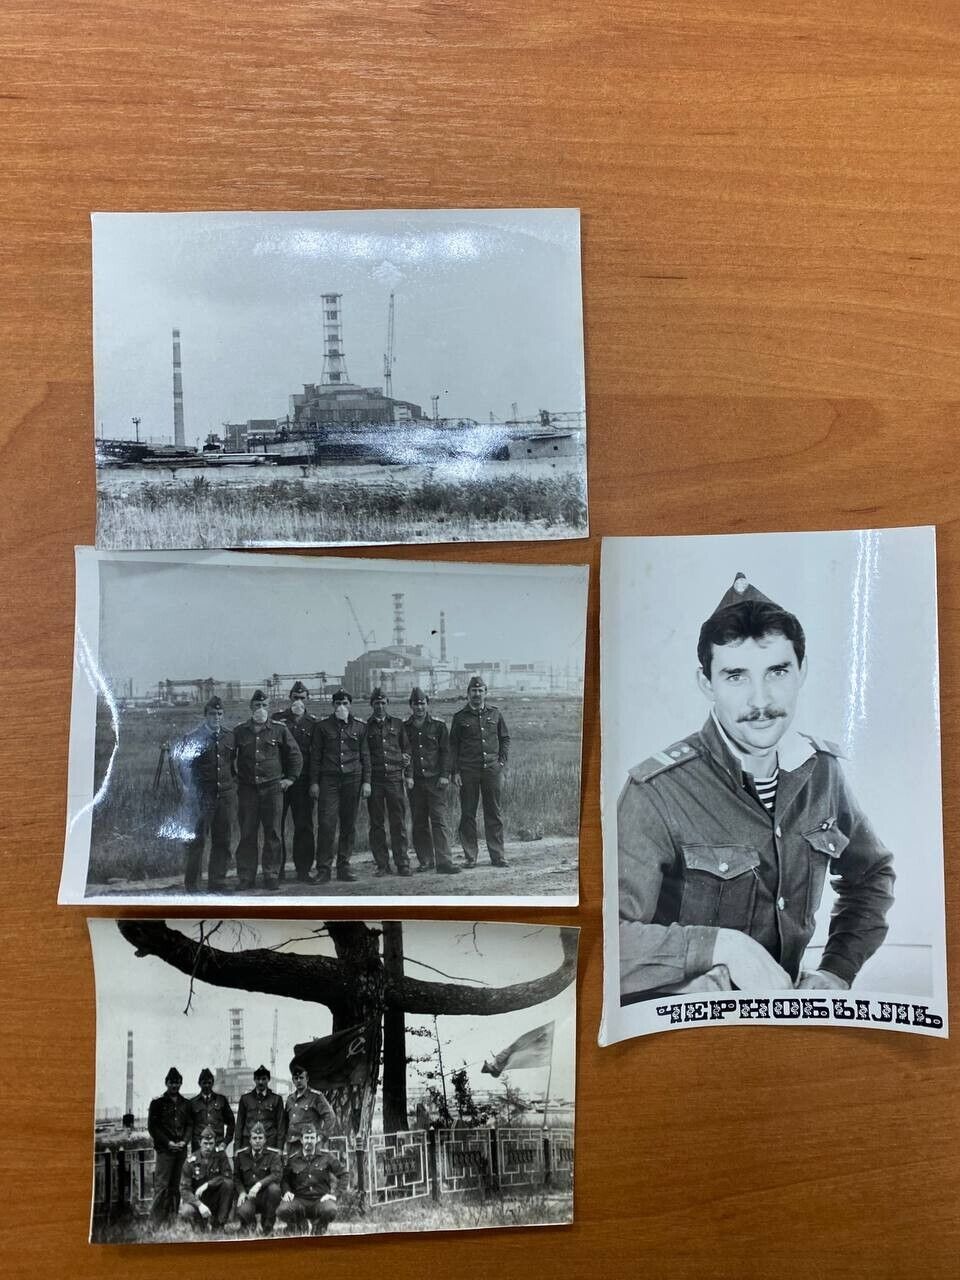 Chernobyl Photos of Military Soldiers at the Liquidation of Chernobyl Nuclea